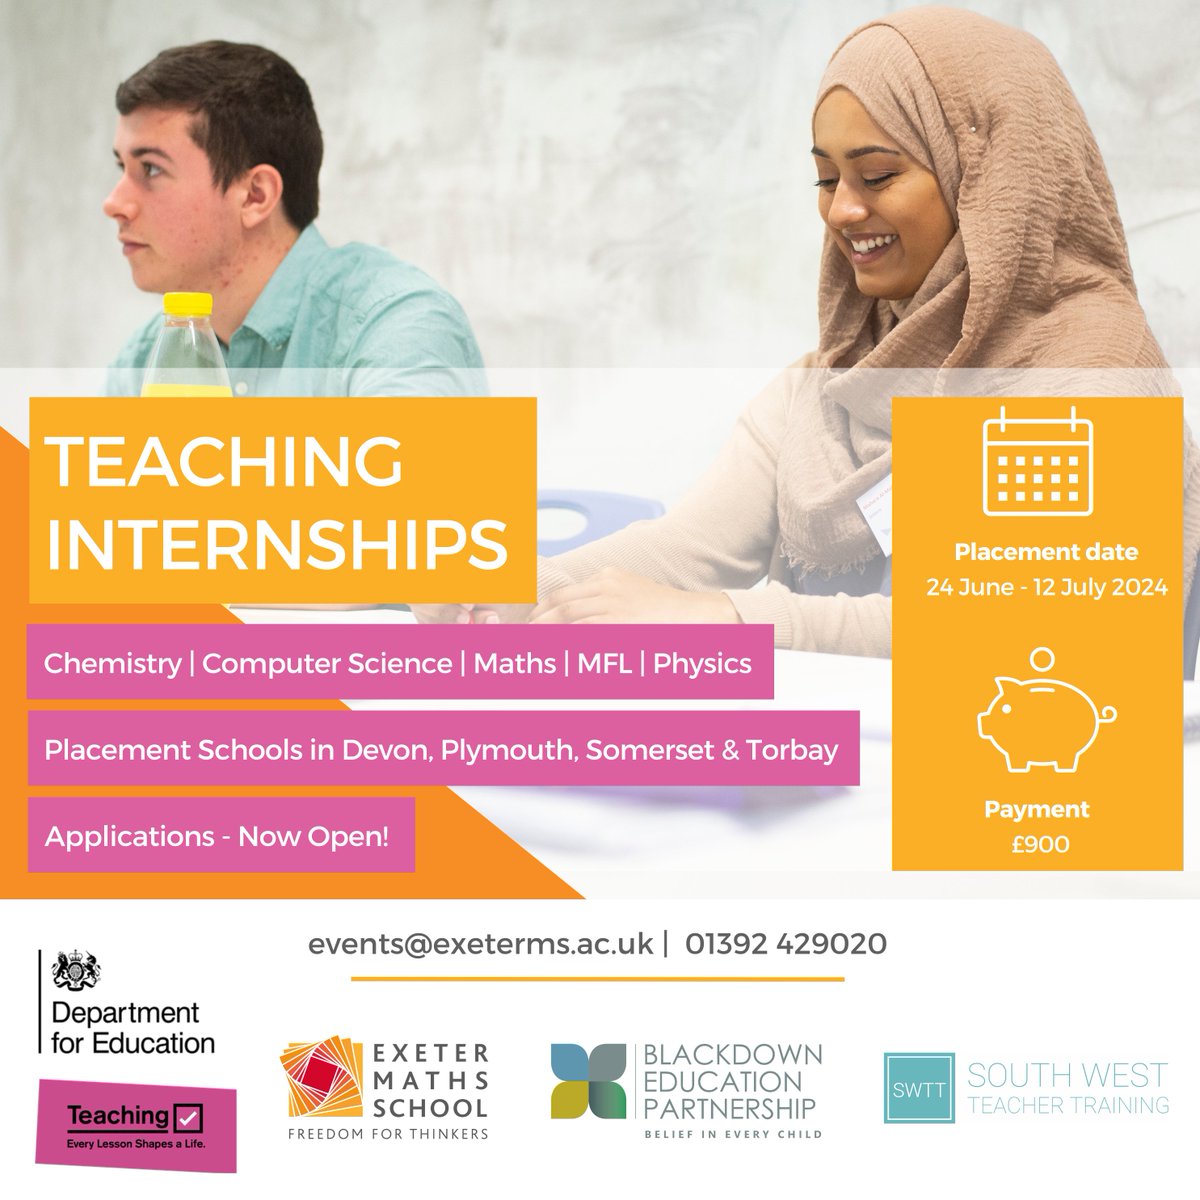 📢Deadline for Applications - midday, next Monday 12 February 📢 Find out more, here: exetermathematicsschool.ac.uk/internships/ #TeachingInternship #PaidInternship #GetIntoTeaching